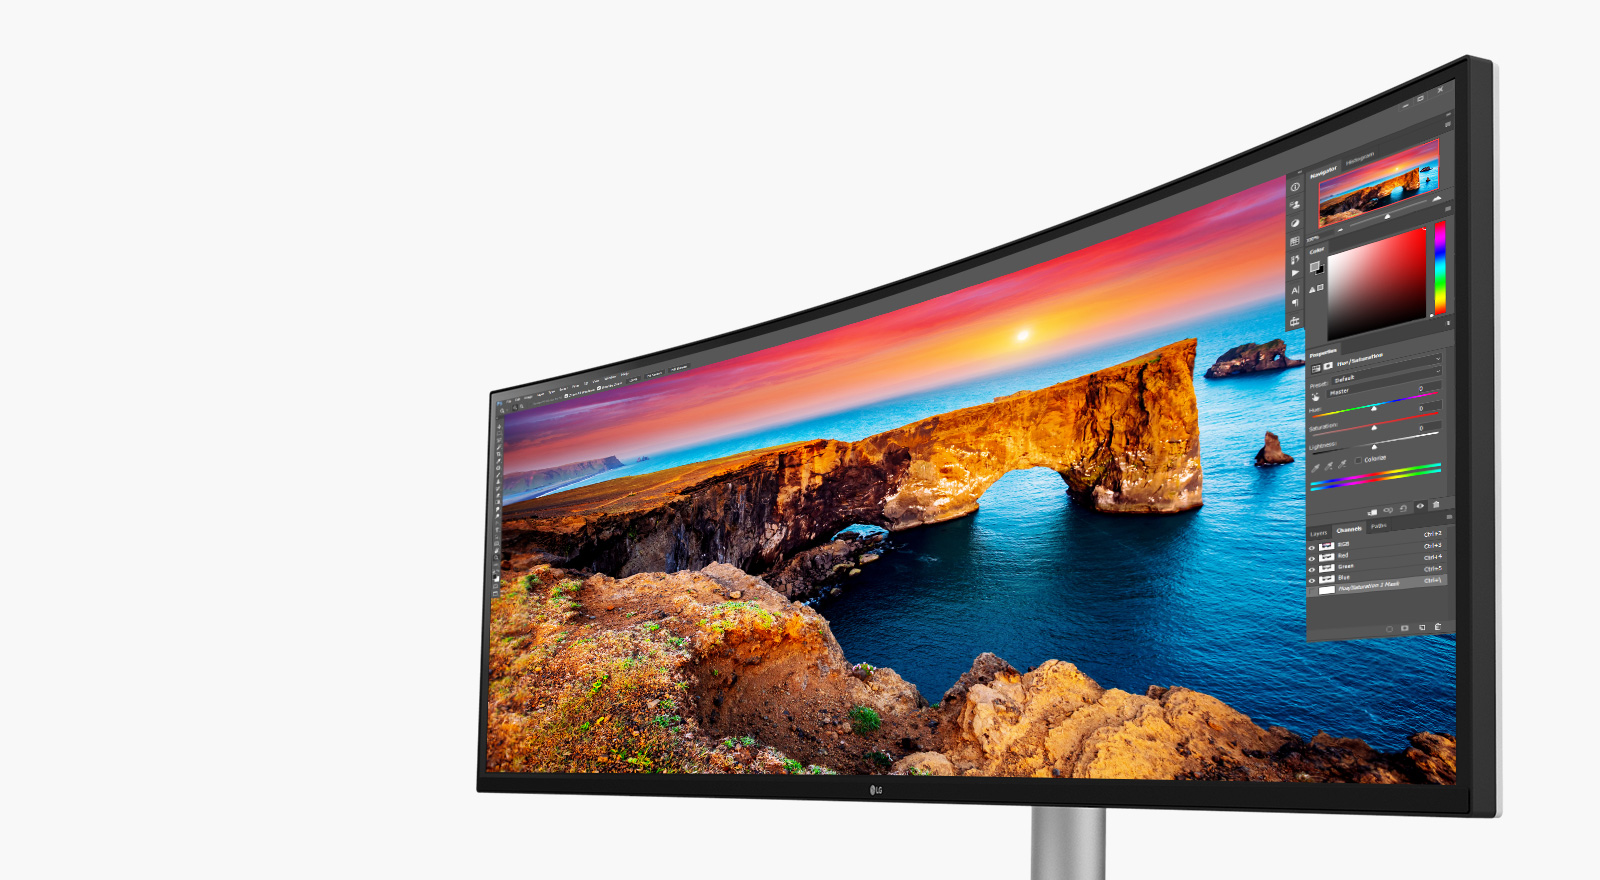 LG Nano IPS™ display supports a wide color spectrum, 98% of DCI-P3 color gamut, and offers outstanding color and brightness with the support of VESA Display HDR™400.